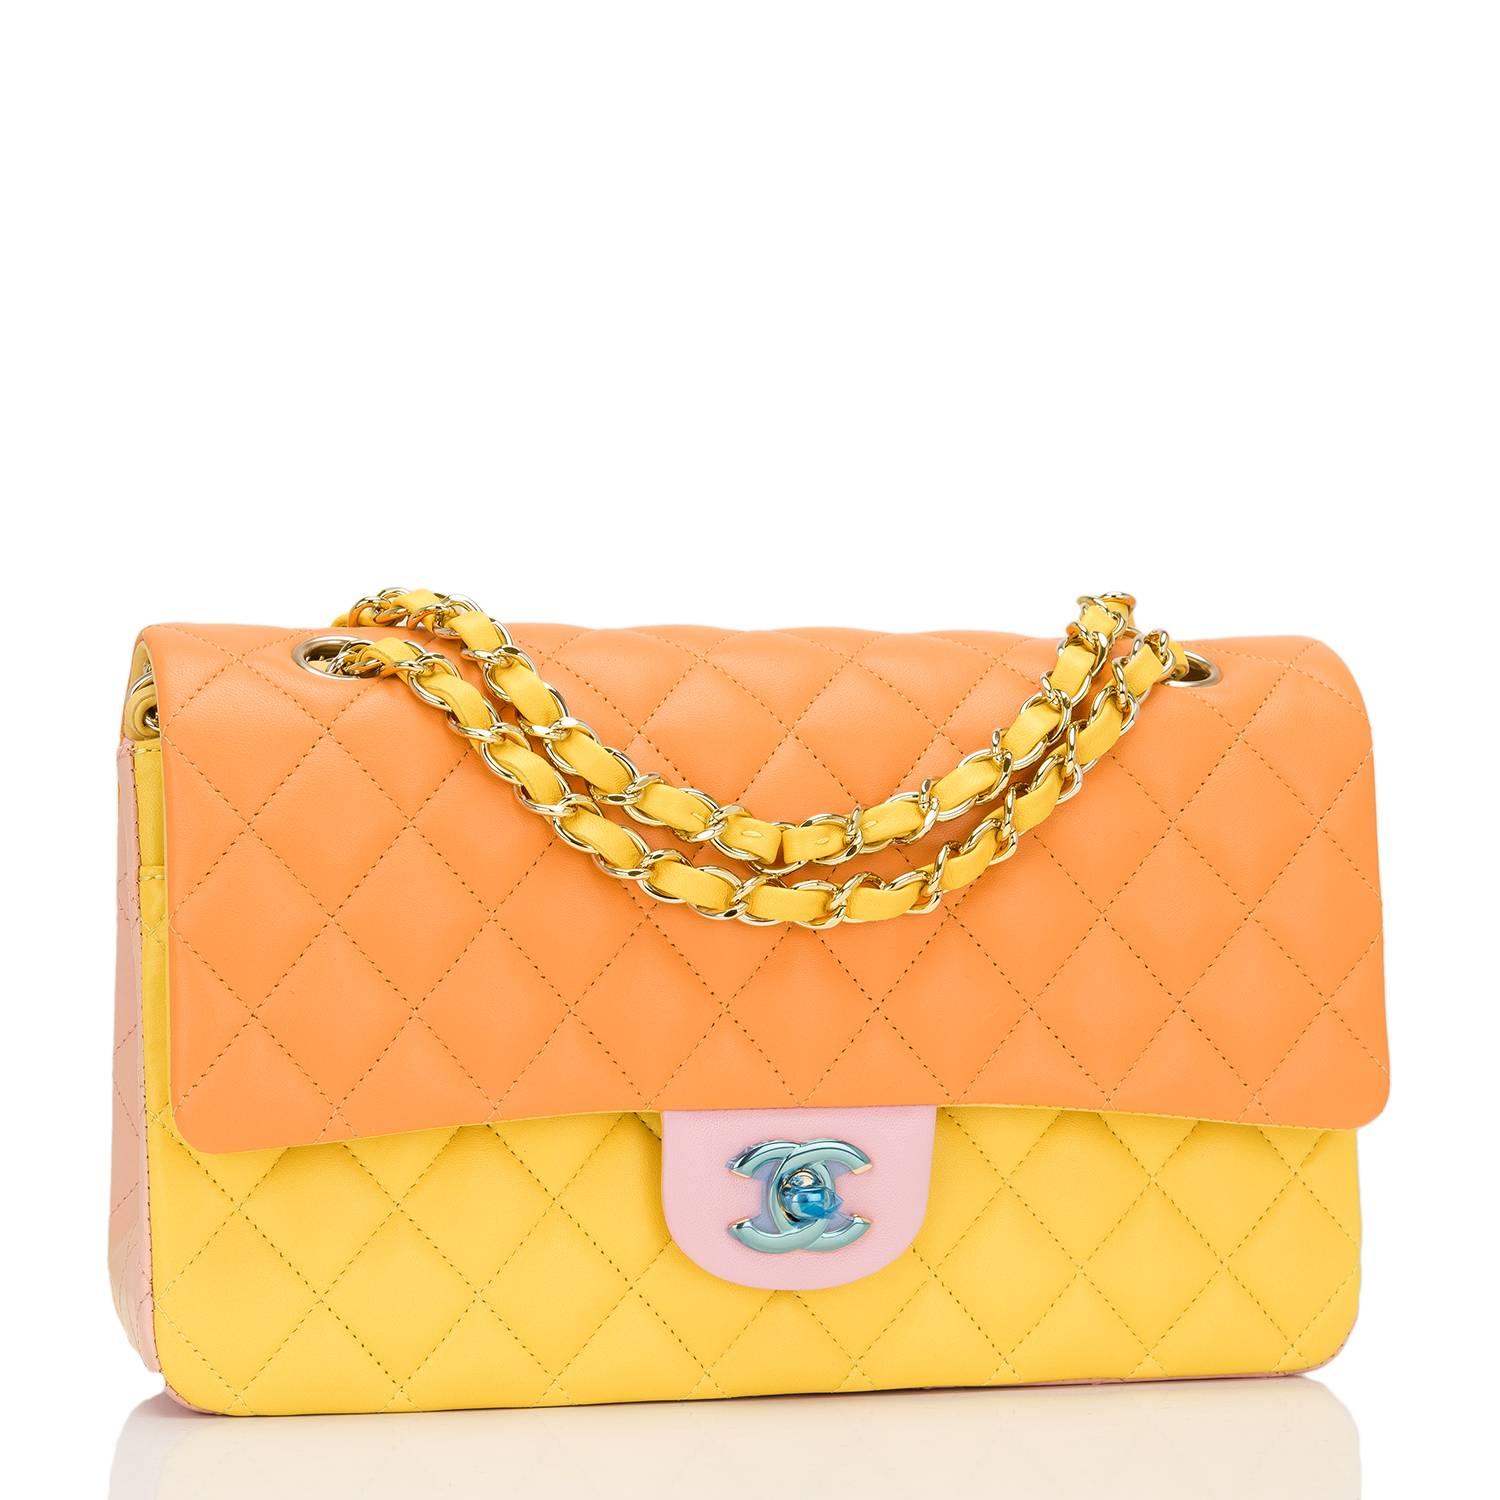 Chanel Medium Classic double flap bag of pink, yellow and orange quilted lambskin with gold tone hardware.

This limited edition bag is of classic design and features the signature CC turnlock closure, half moon rear pocket and adjustable interwoven